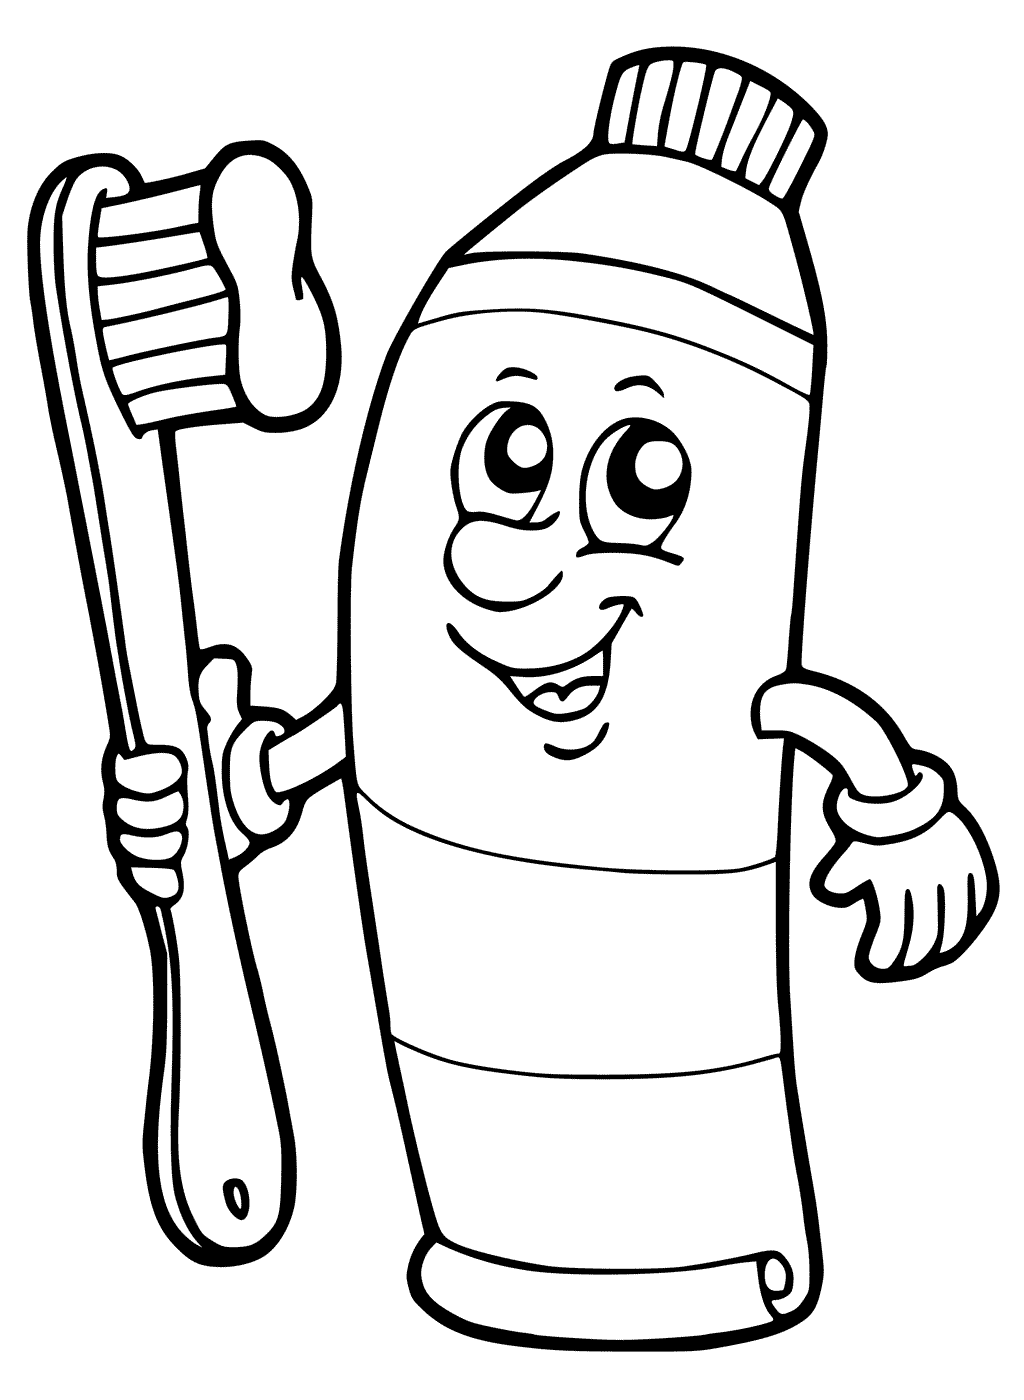 Snubberx Toothbrush Coloring Pages